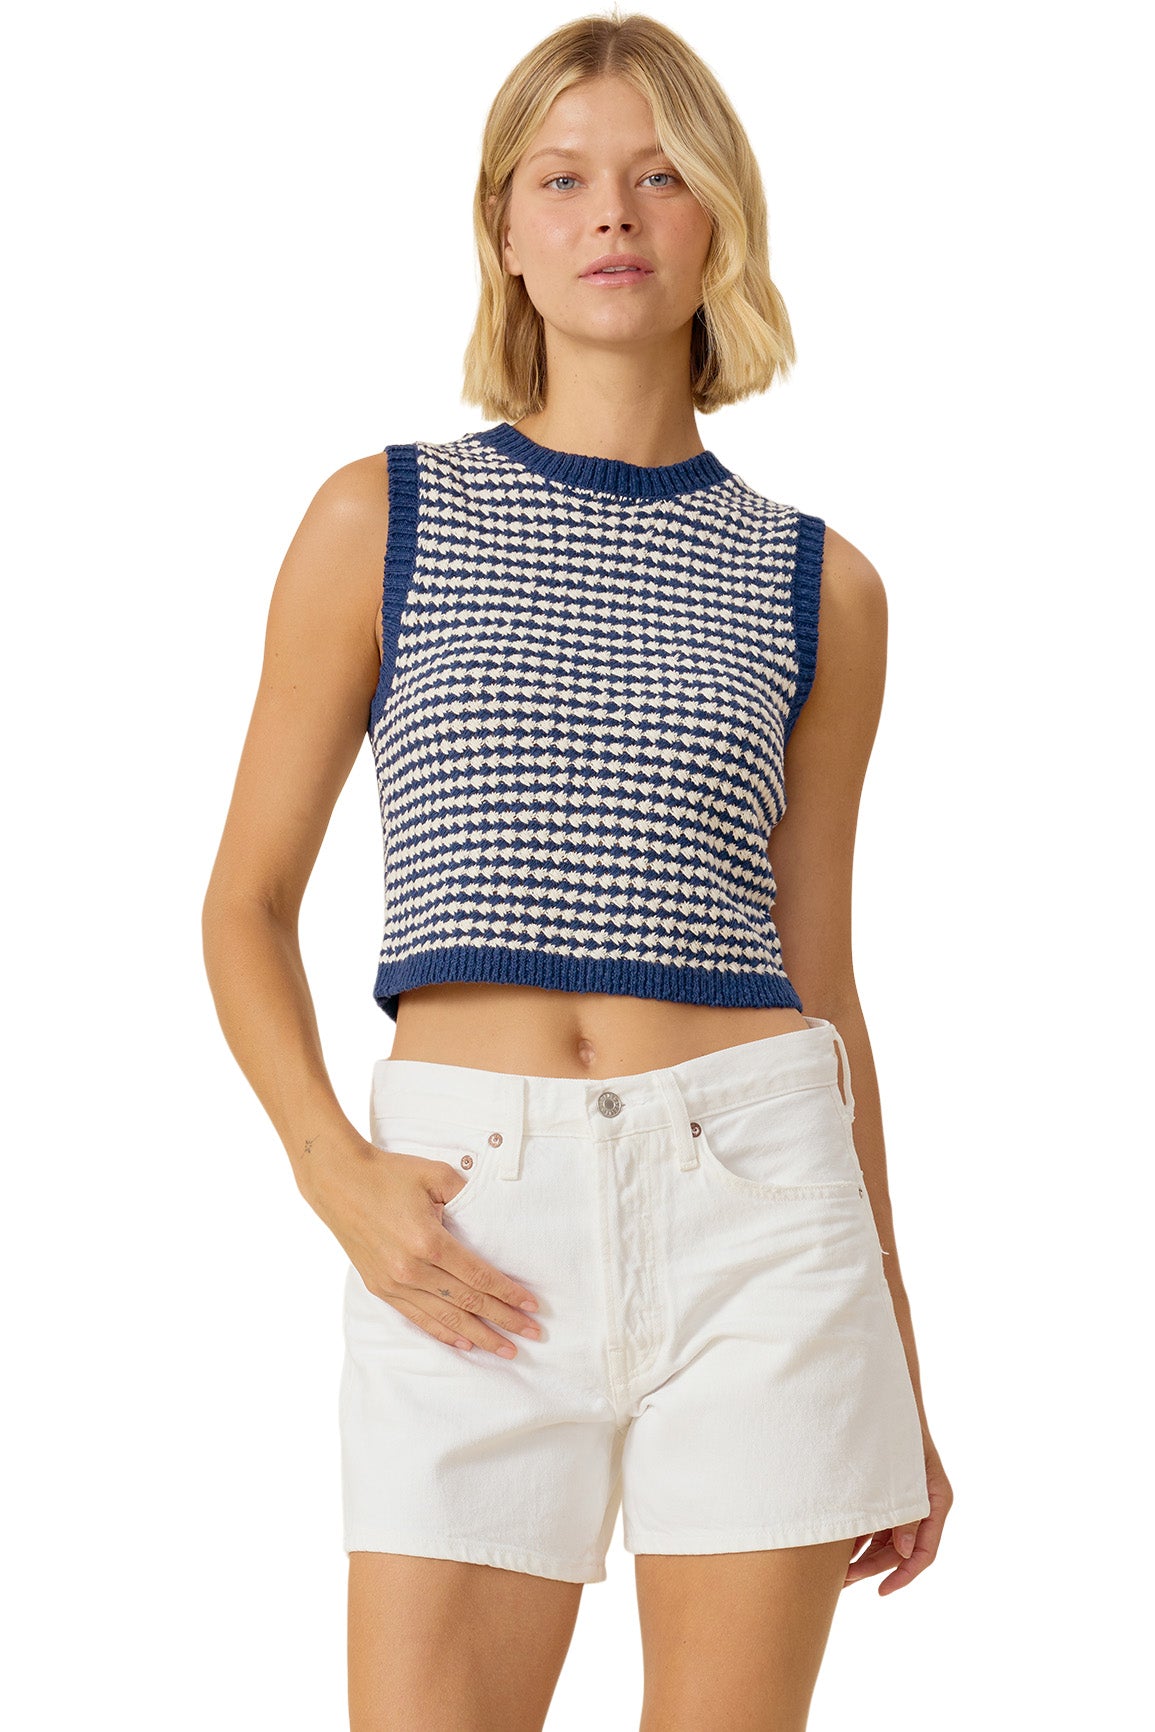 One Grey Day Louise Sleeveless Top in Navy Combo